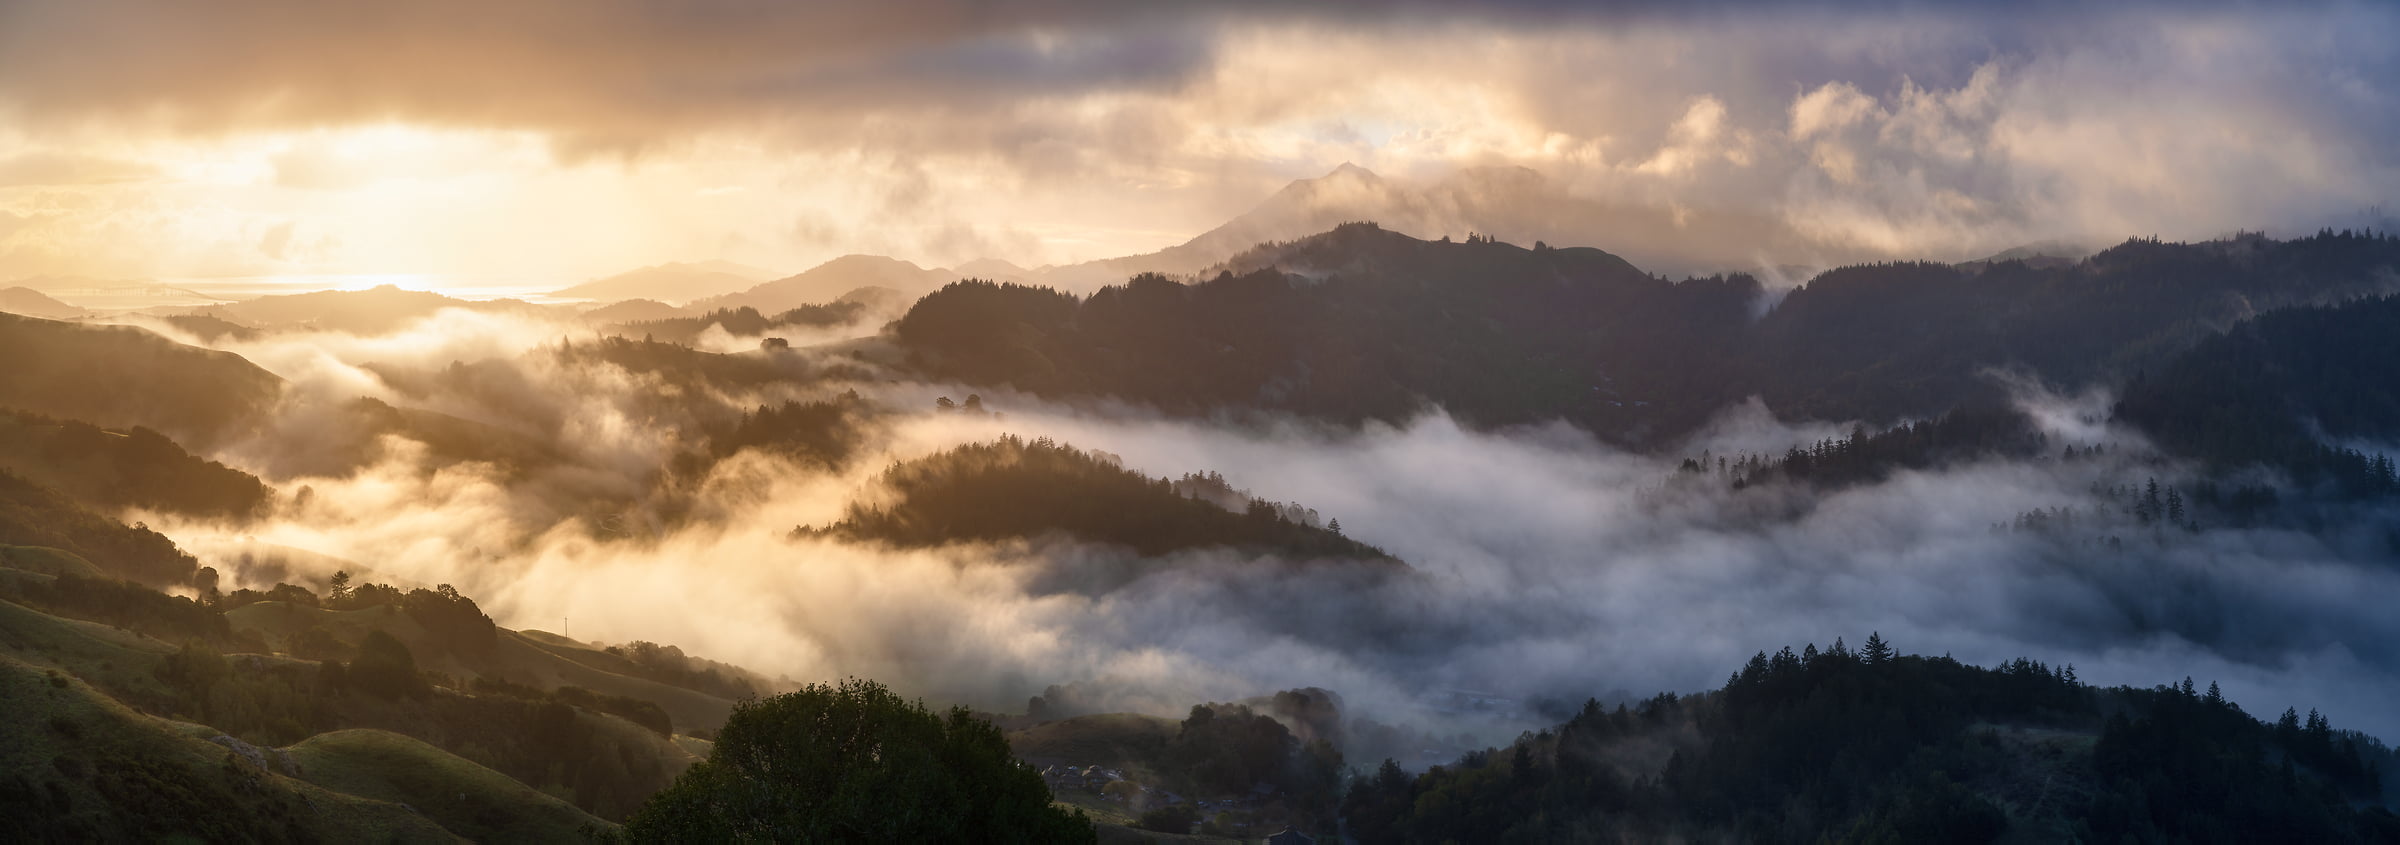 150 megapixels! A very high resolution, large-format VAST photo print of a beautiful landscape; wallpaper photograph created by Jeff Lewis in Marin County, California.